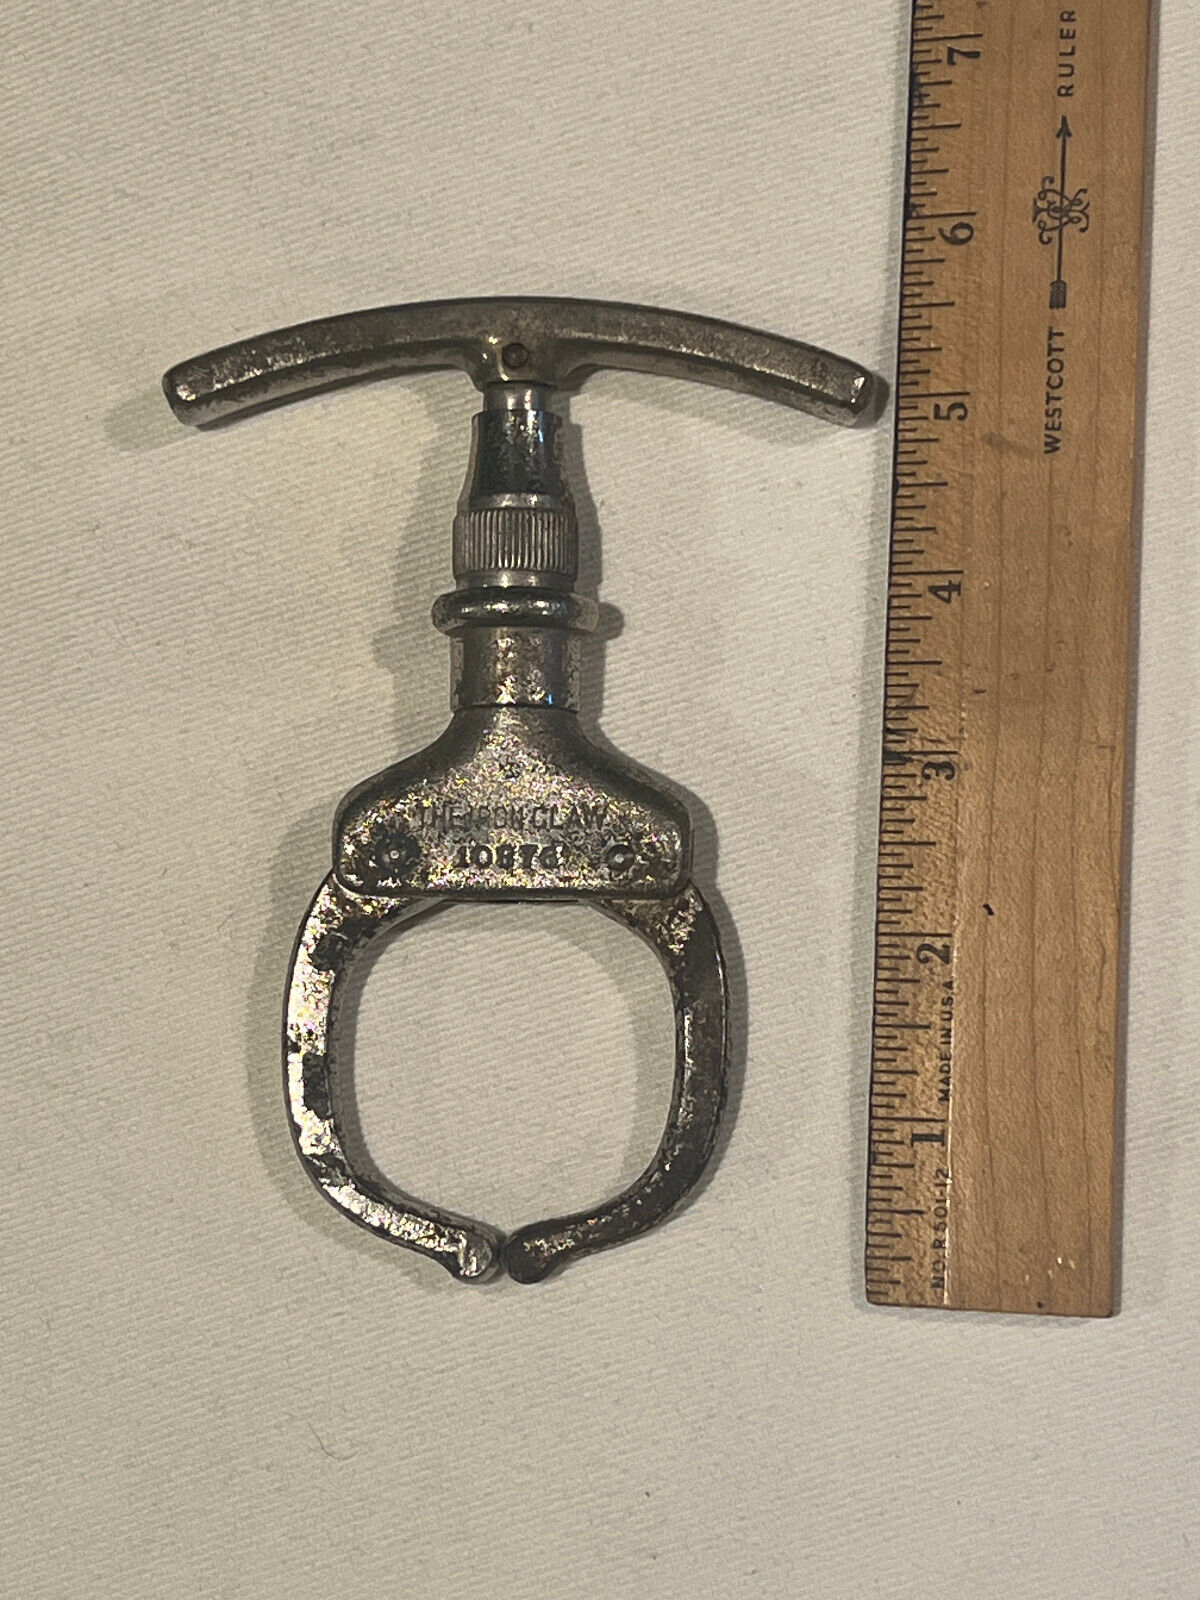 Vintage Argus mfg co THE IRON CLAW Handcuff  10876 USA Working